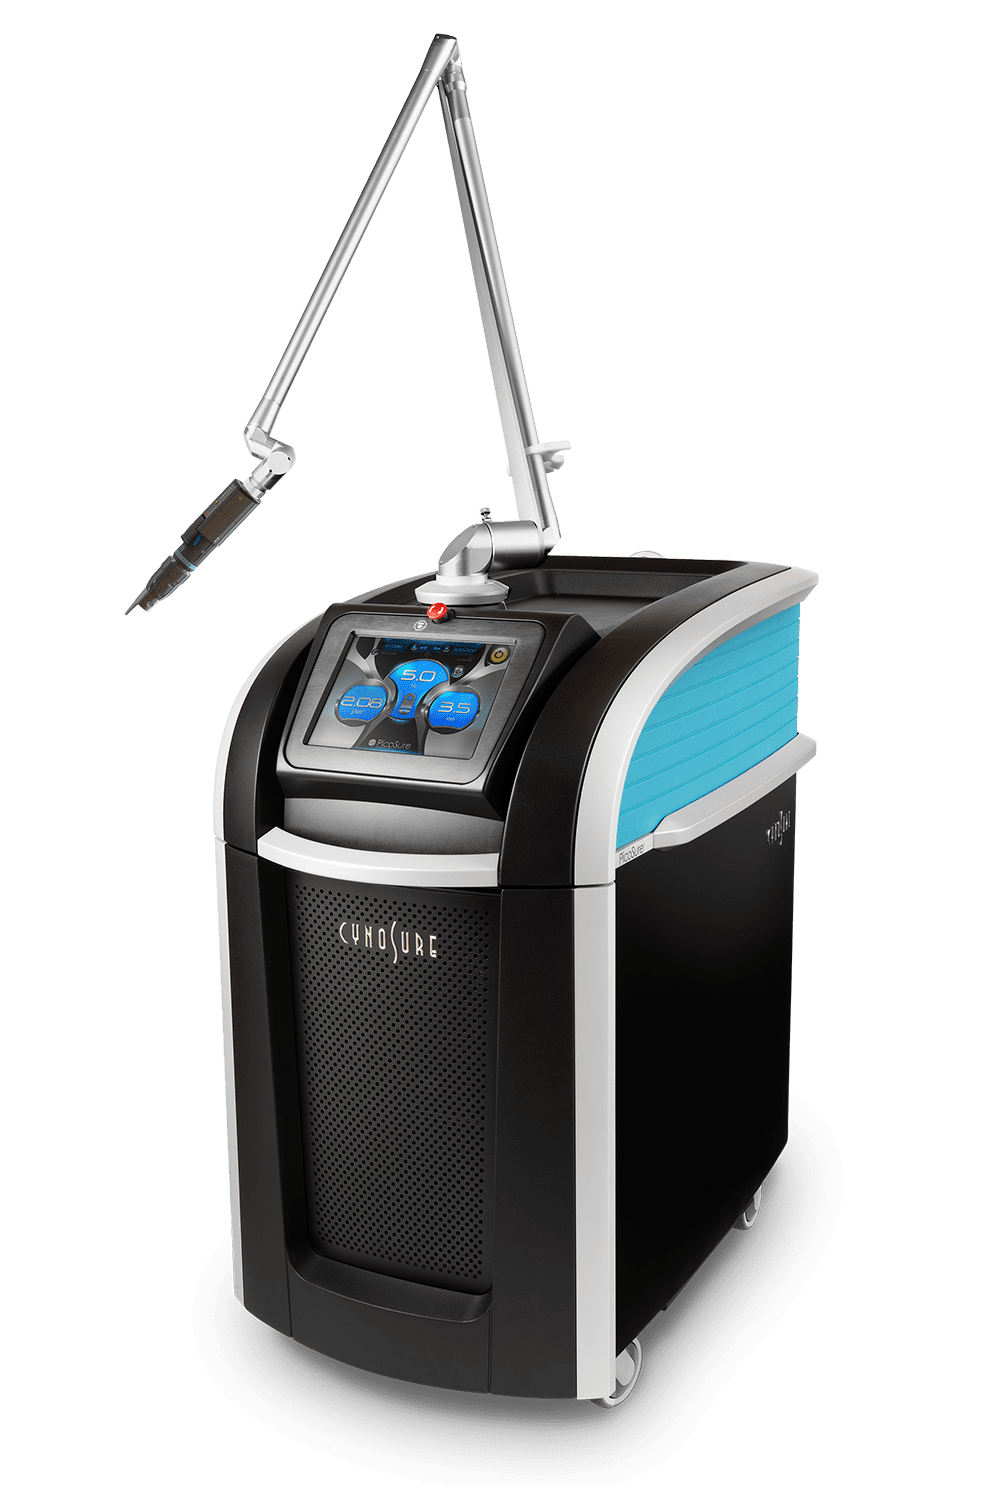 Rejuvie Aesthetic & Dermatology Bali use PicoSure Laser from CynoSure